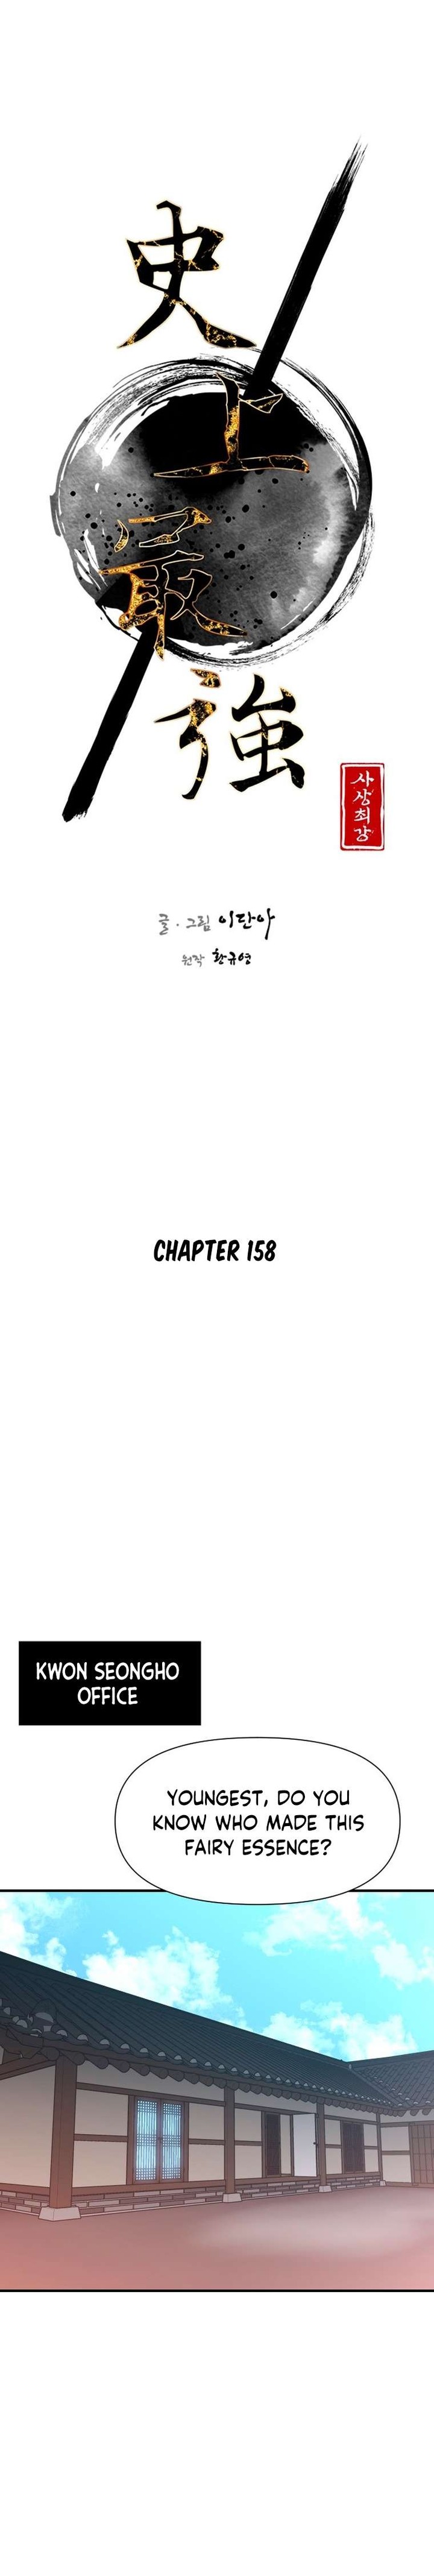 The Strongest Ever Chapter 158 Page 5